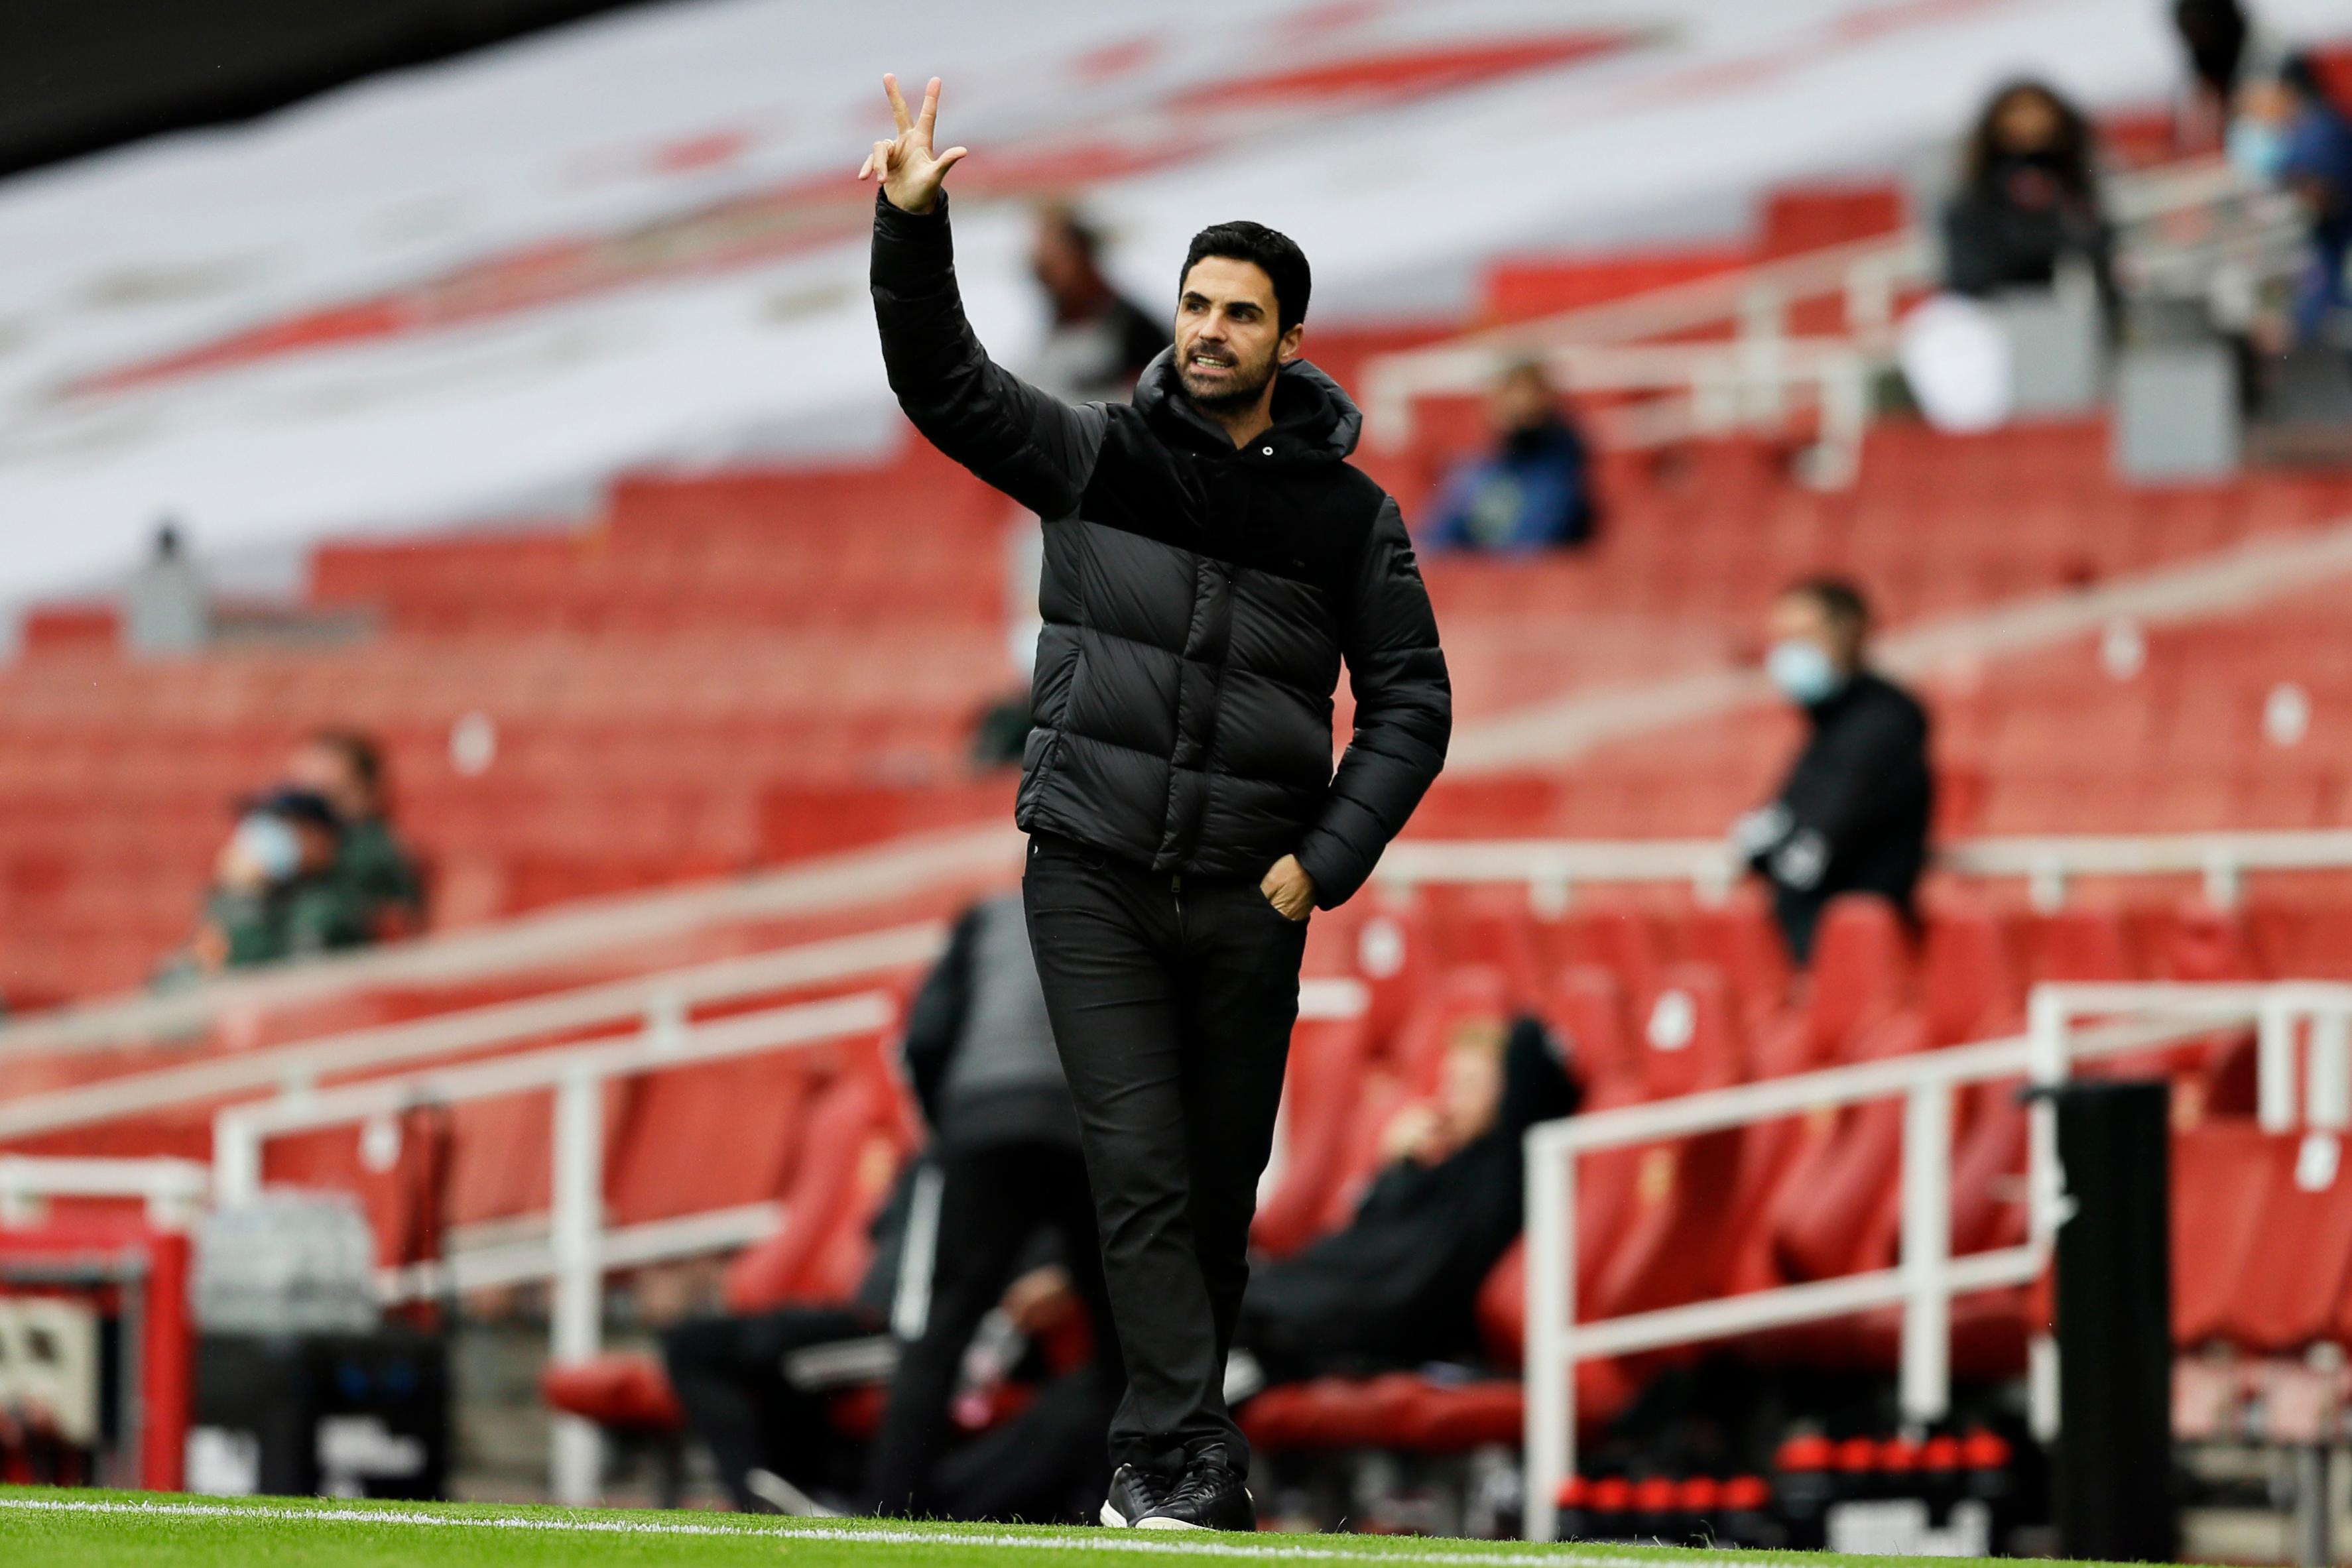 Arsenal are trying their best to finalise the deals, admits Mikel Arteta